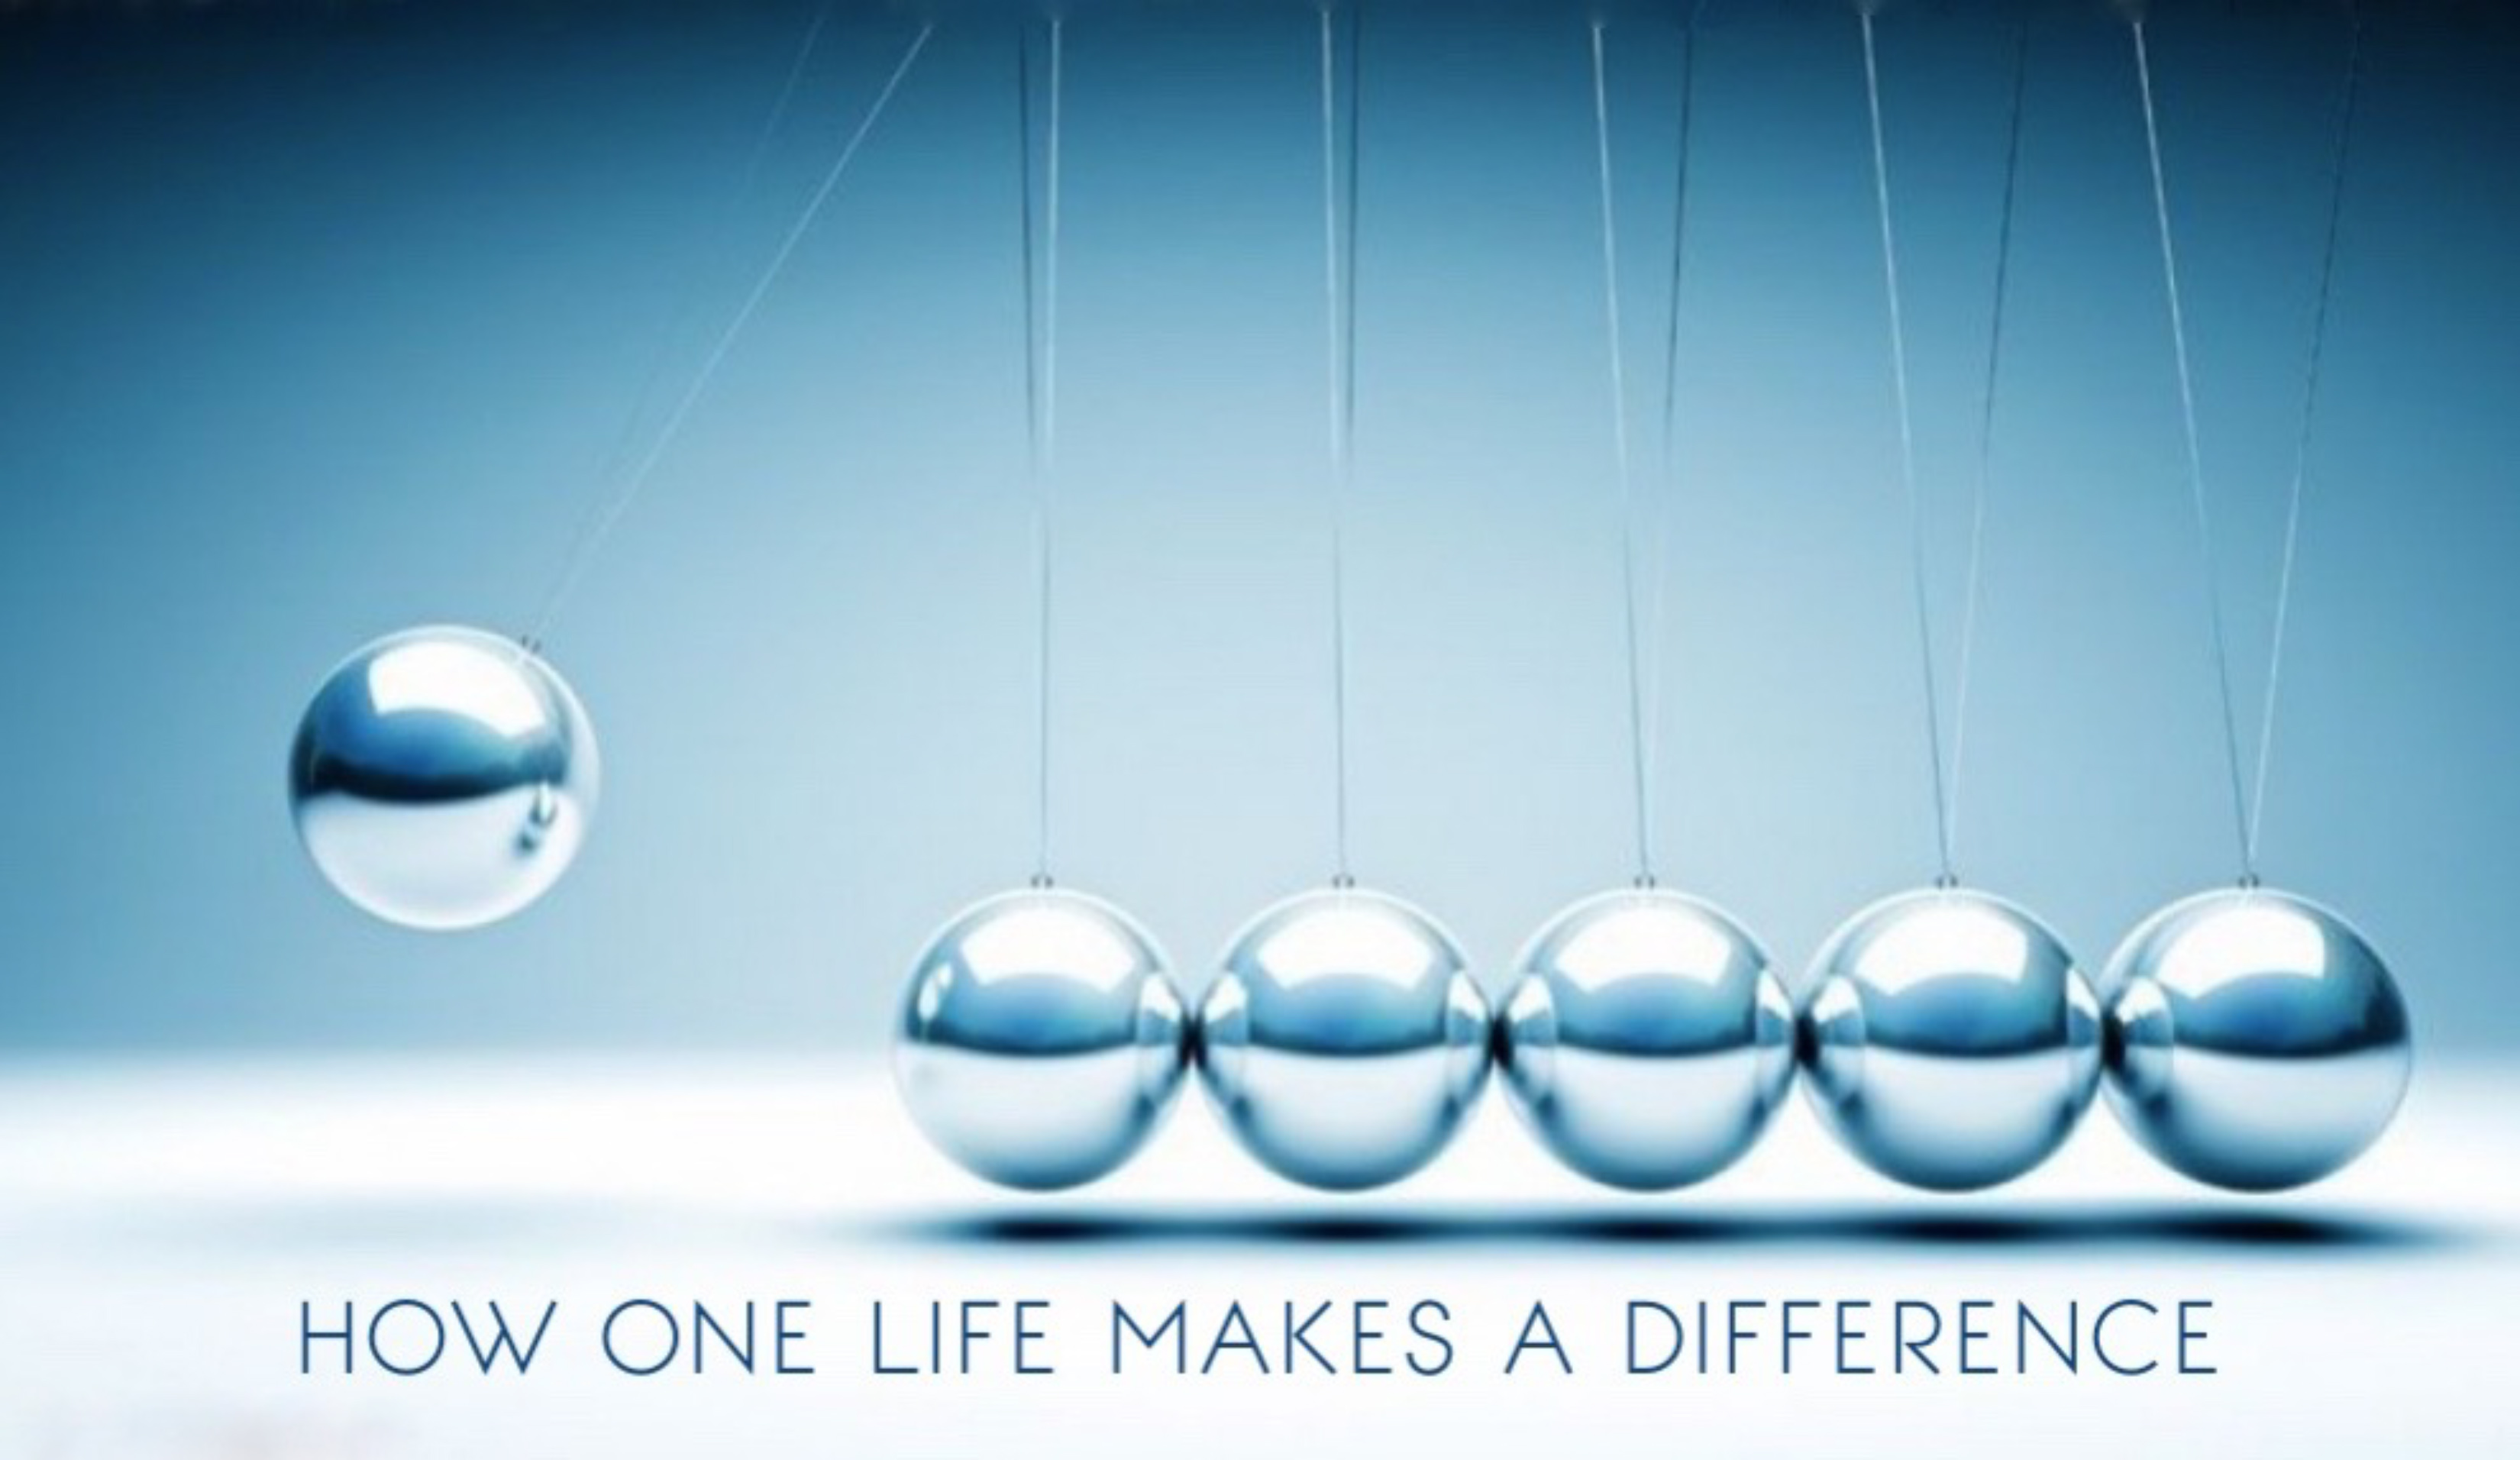 How One Life Makes a Difference